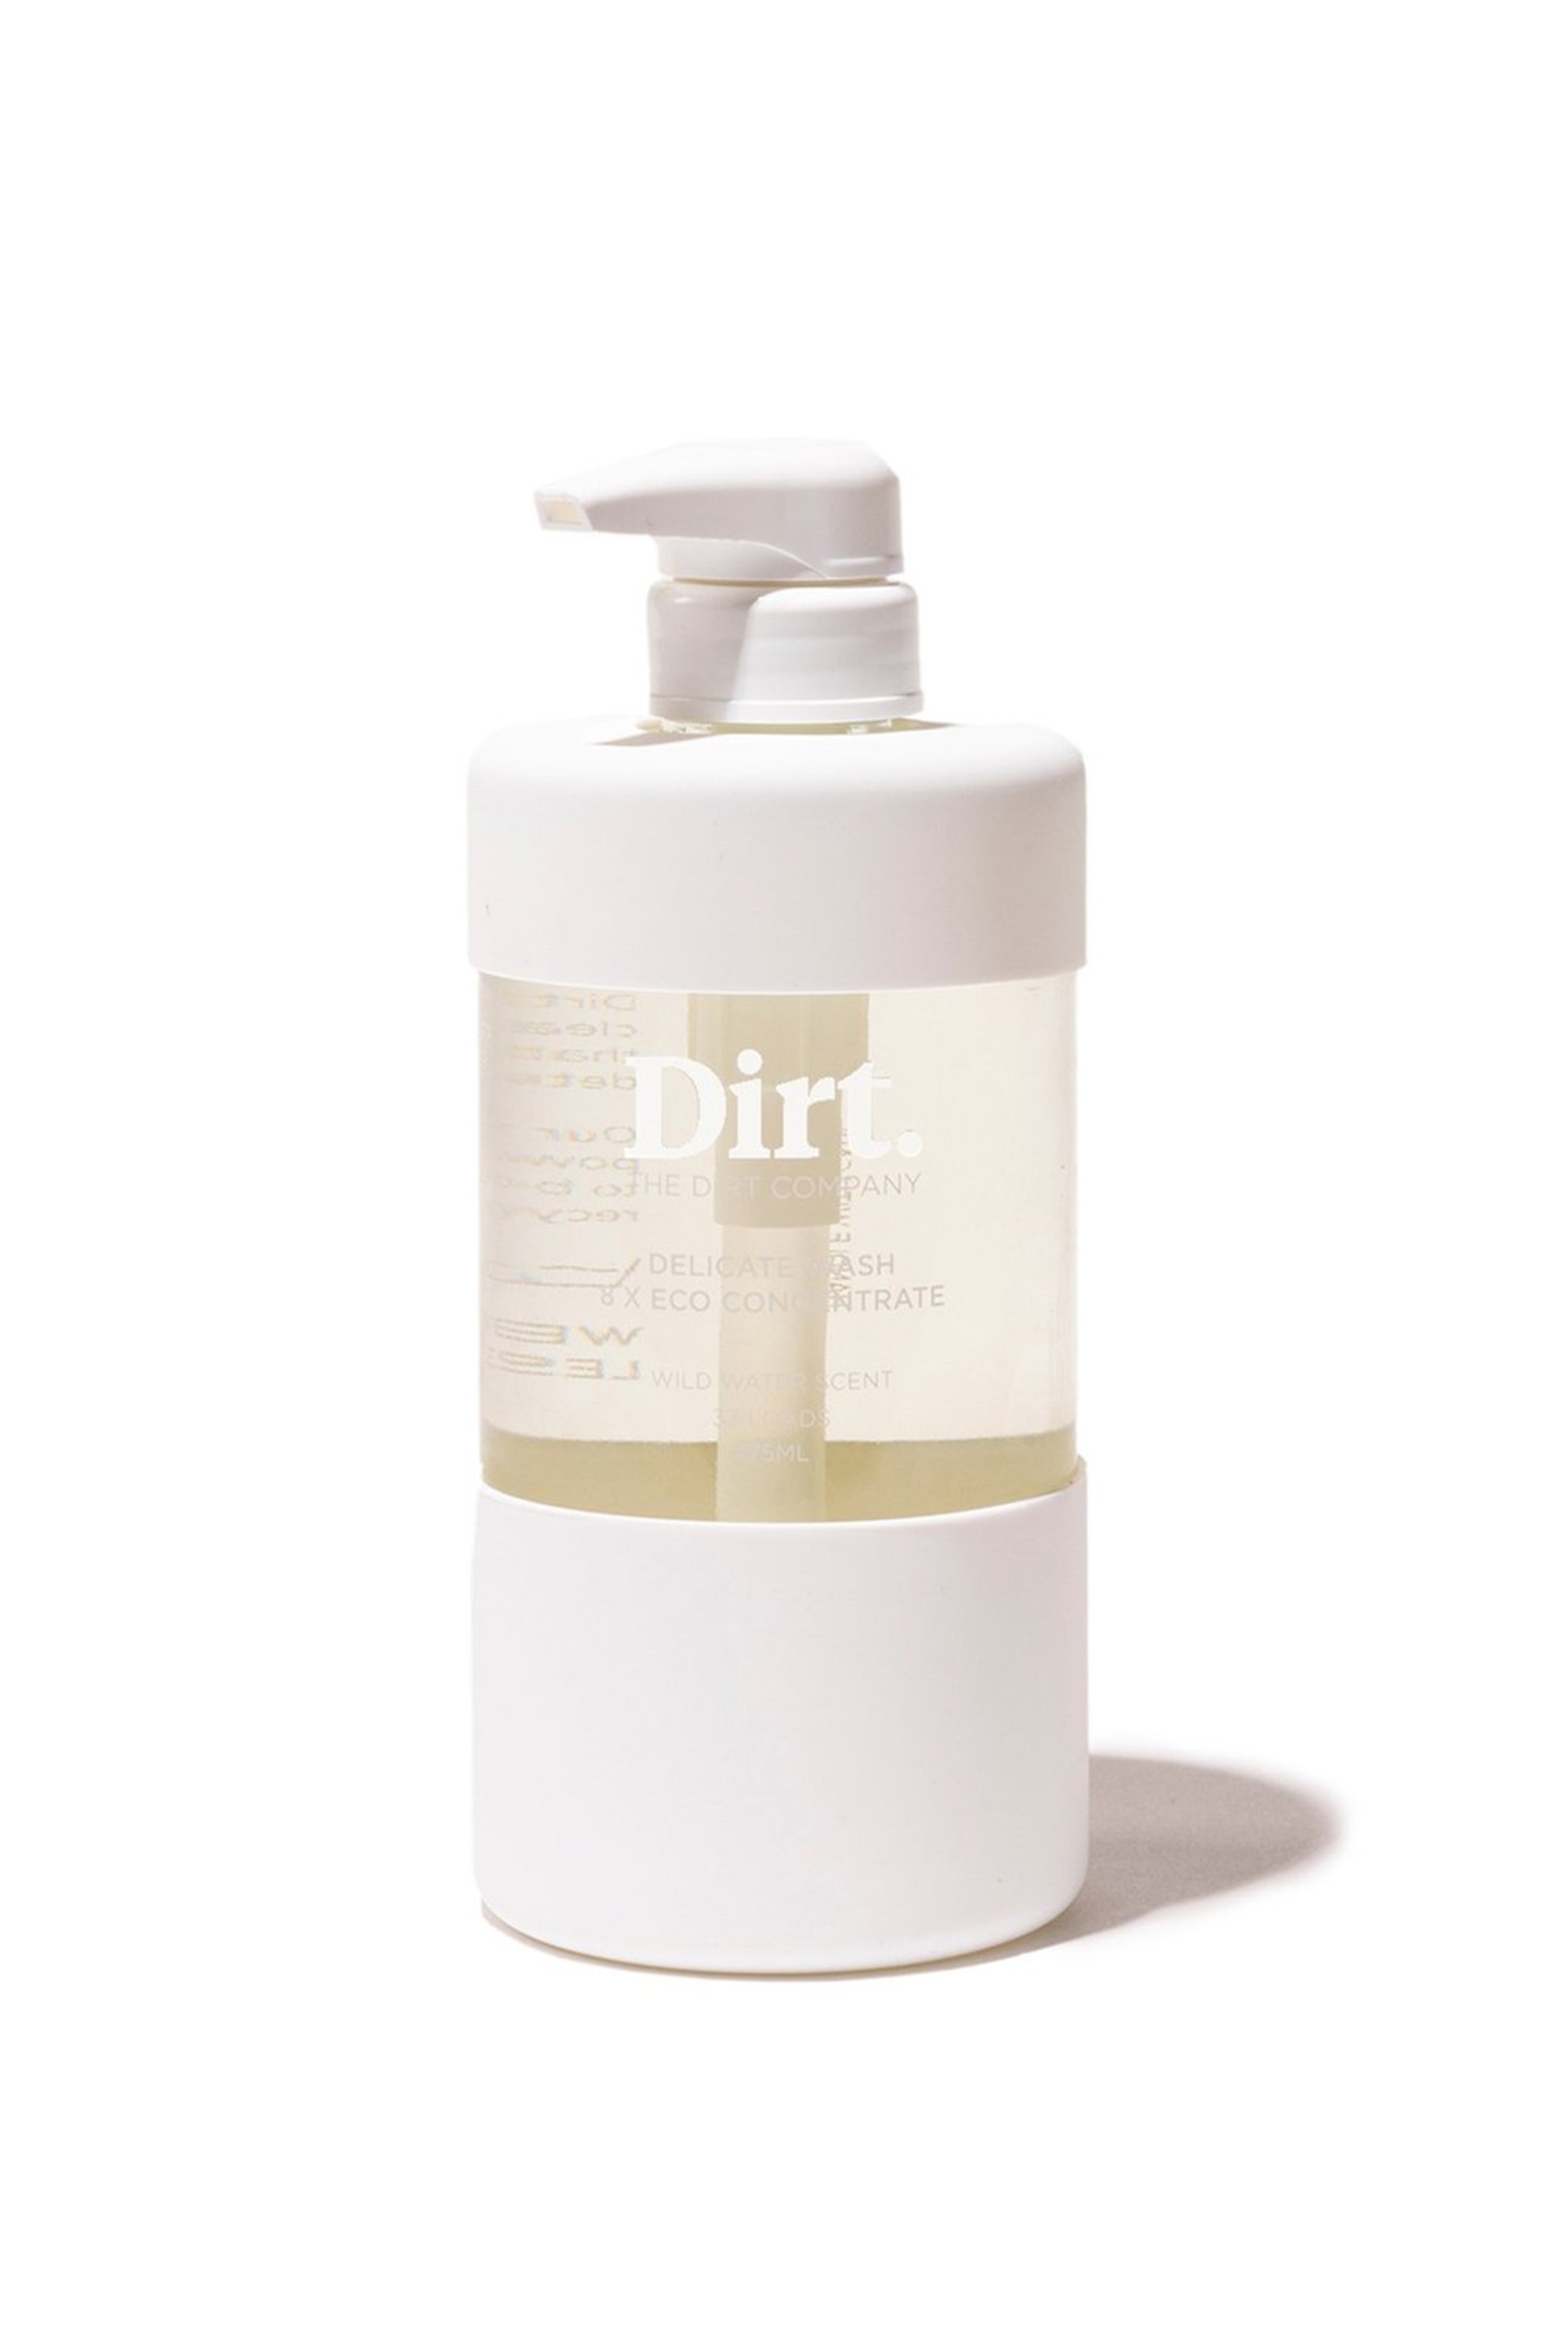 Cotton On Foundation - Dirt Delicate & Wool Wash - 475ml bottle